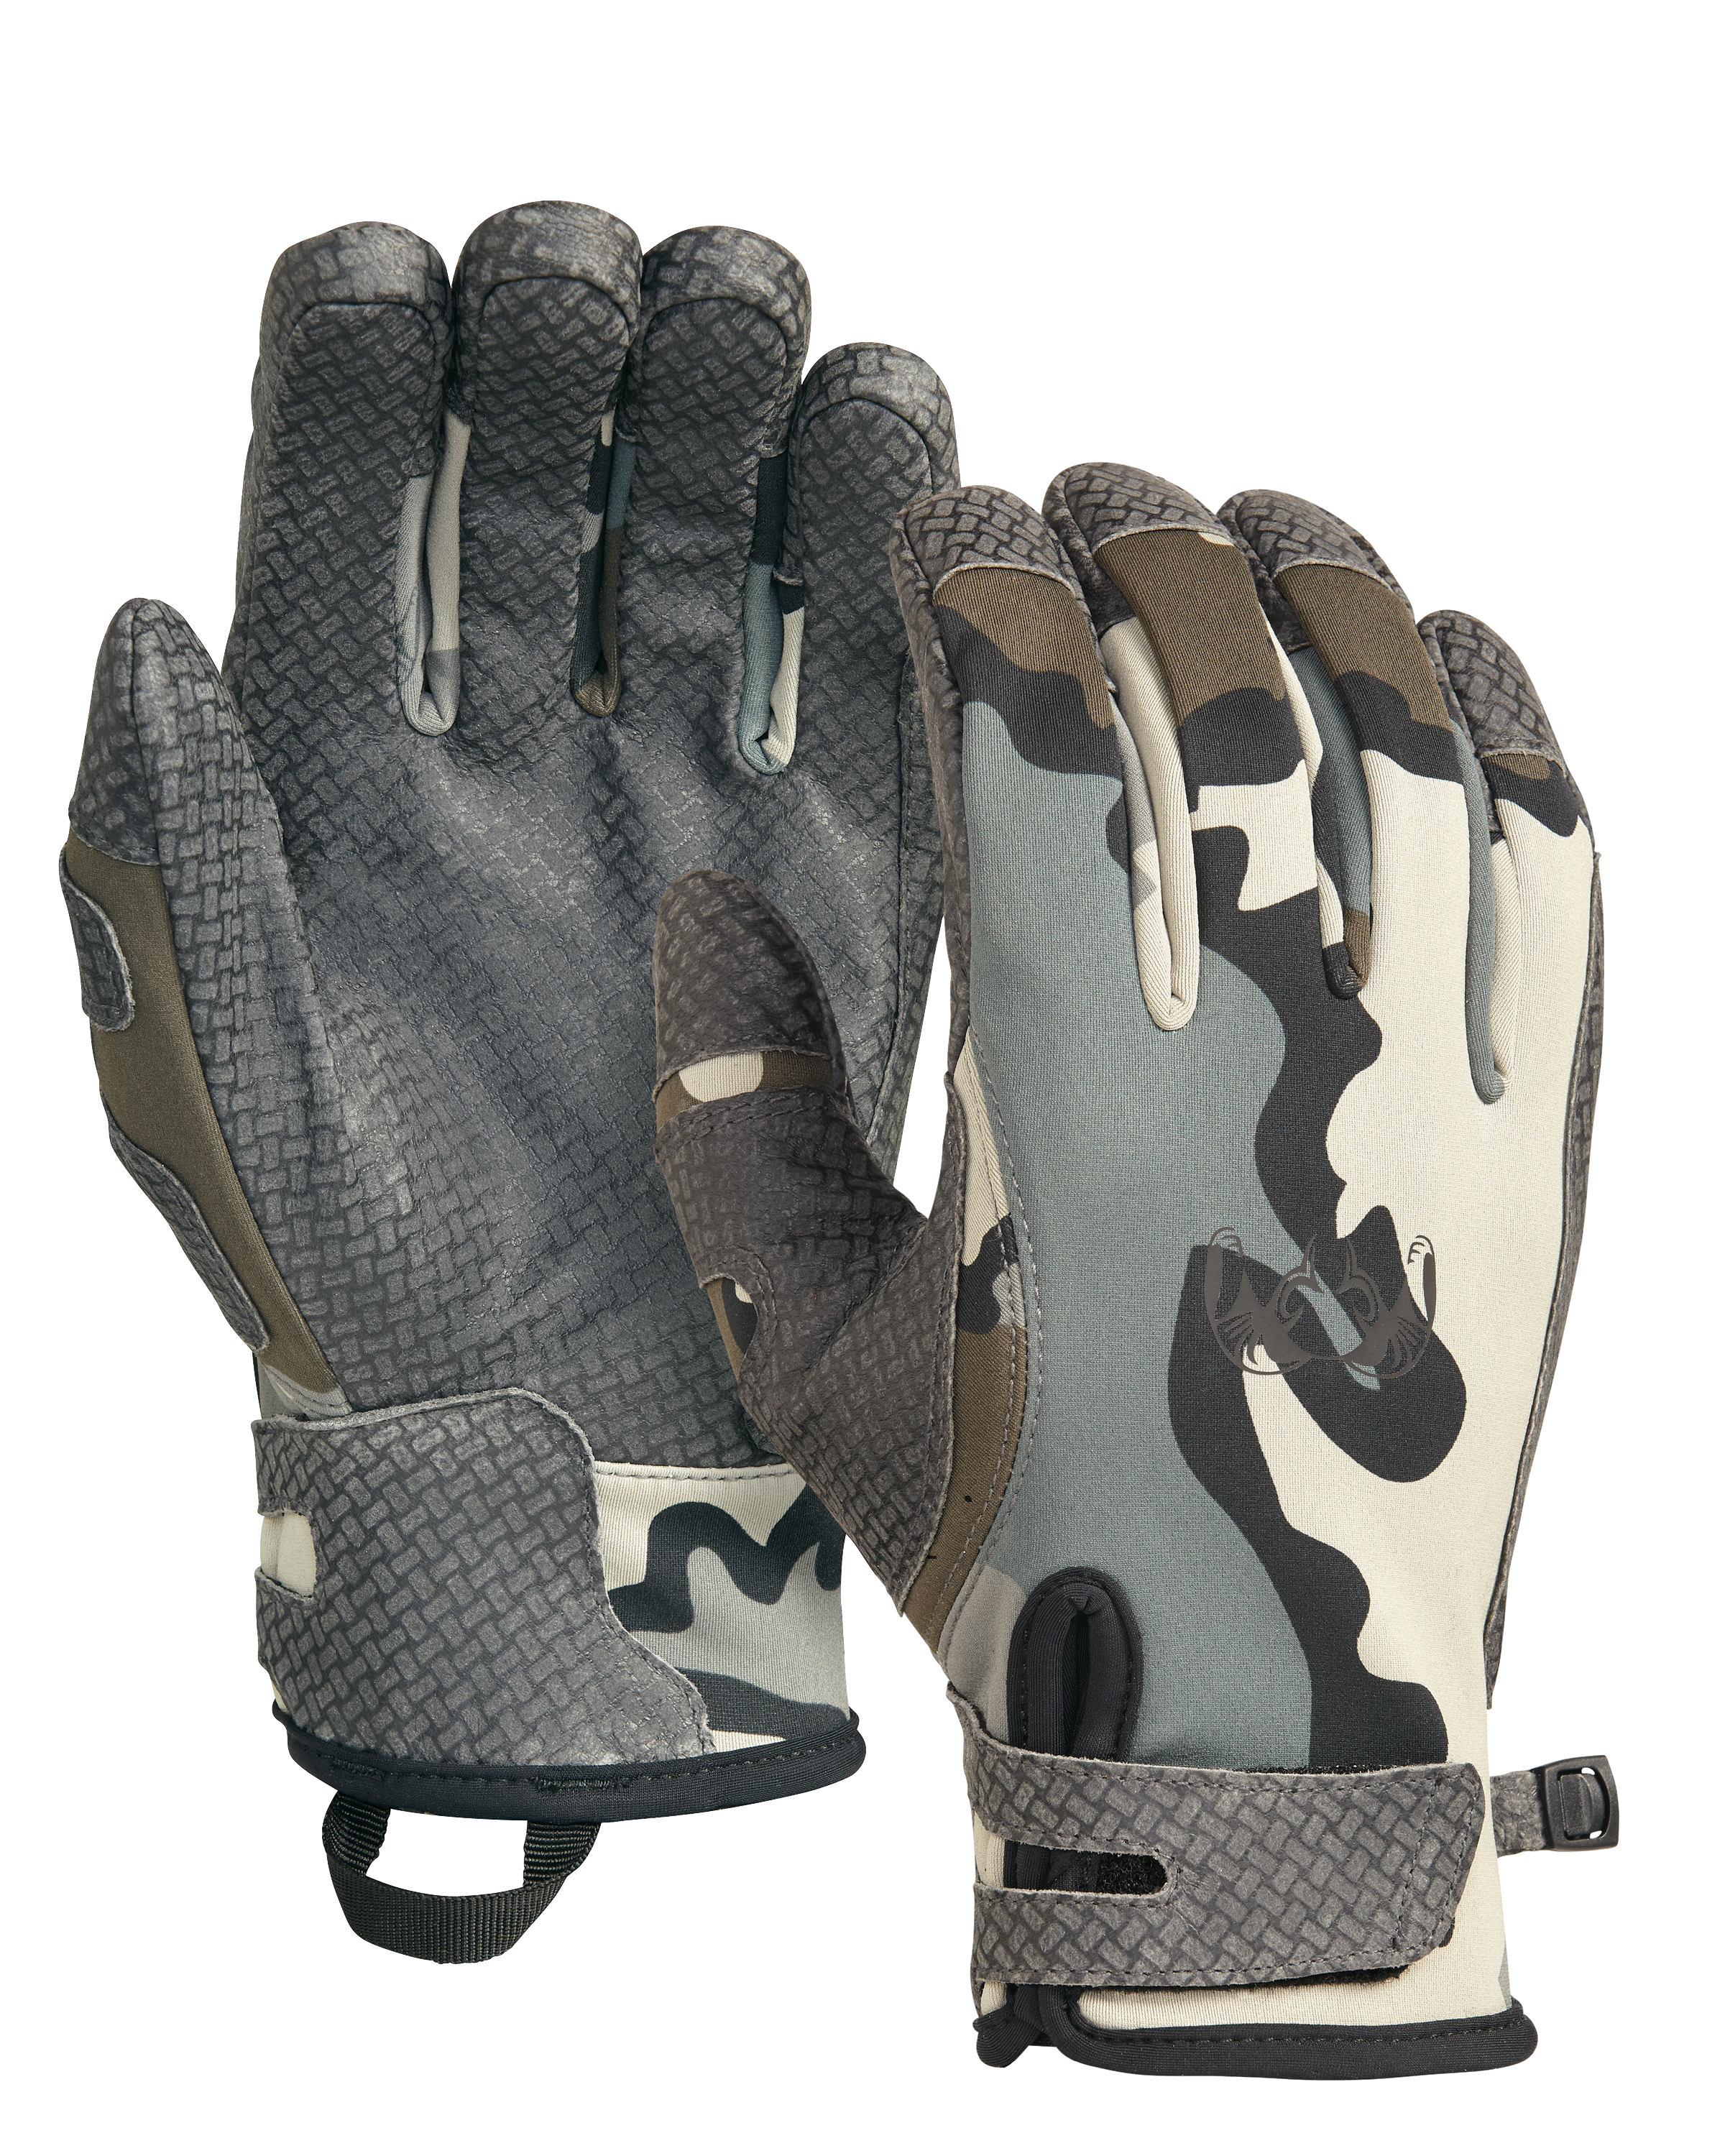 KUIU Guide X Hunting Glove in Vias | Small